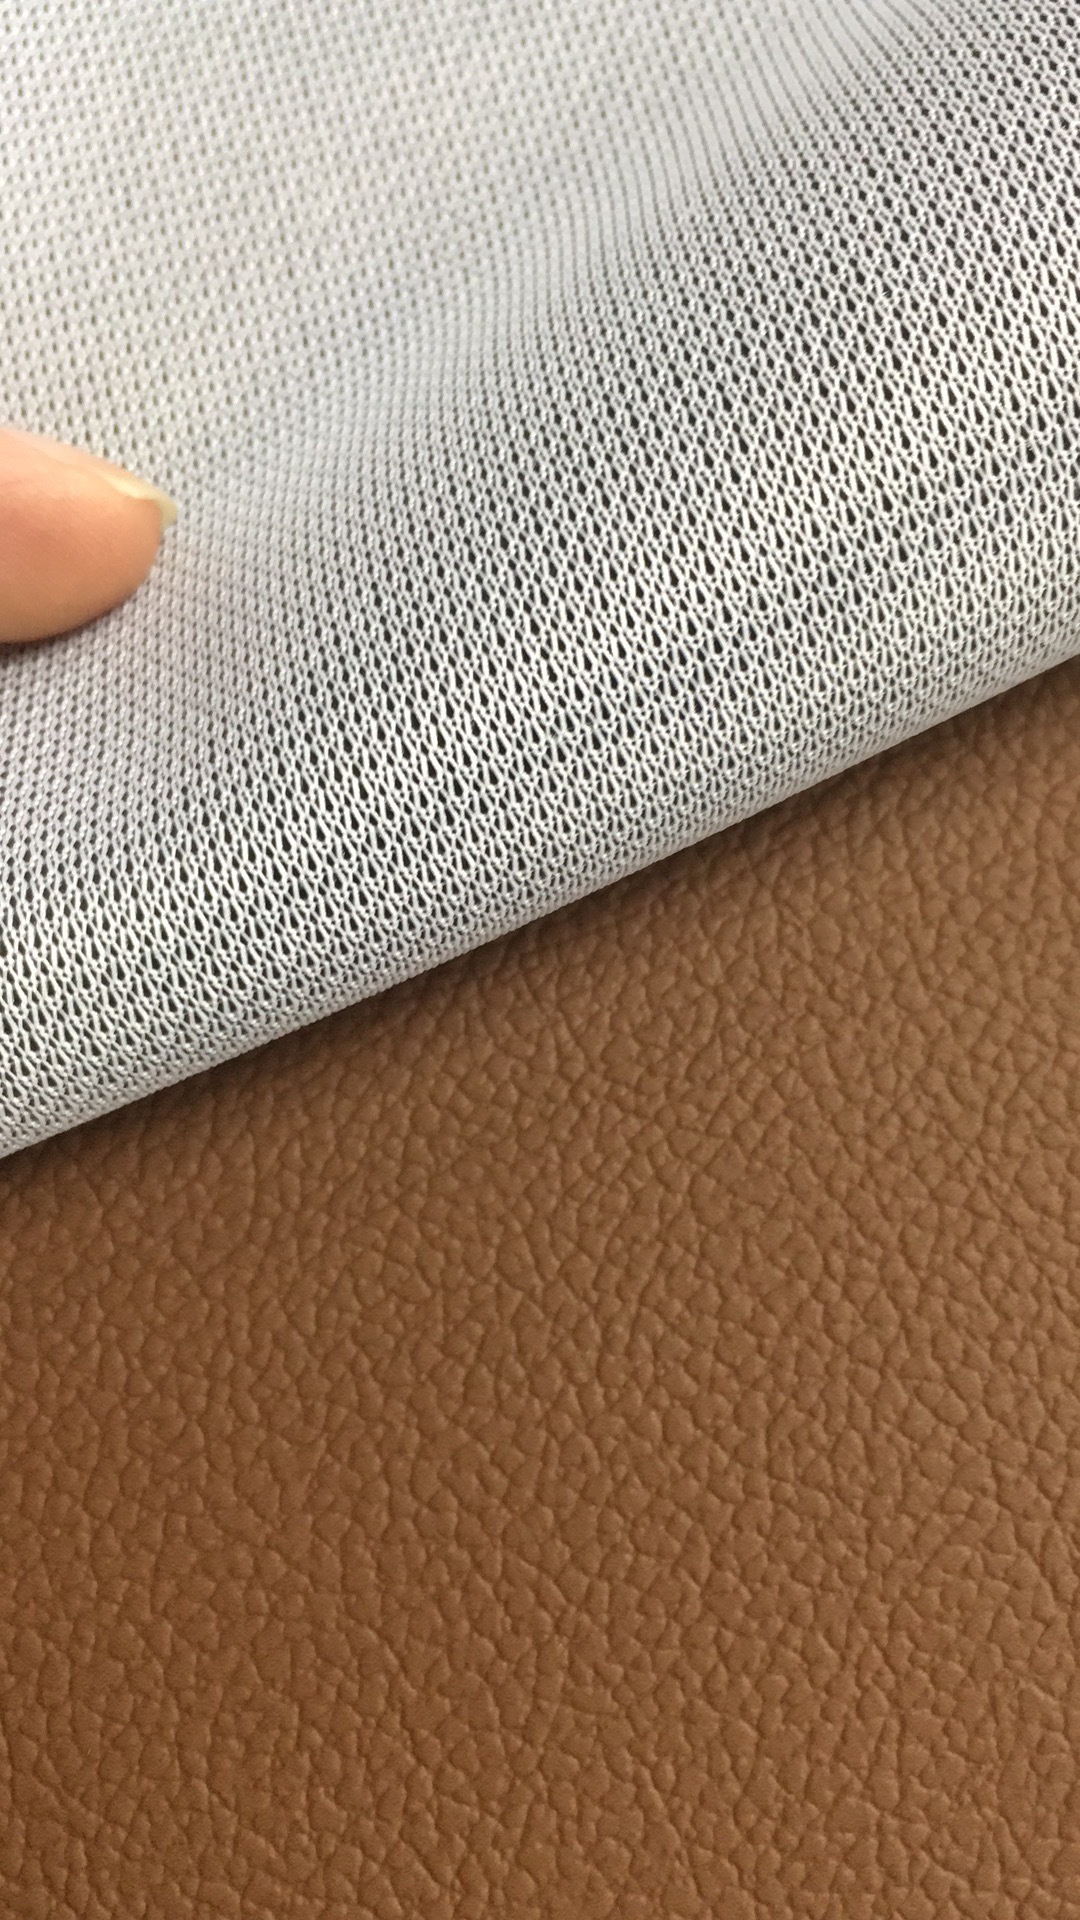 Synthetic Leather Manufacturing Process, Microfiber Leather Fabric Cost